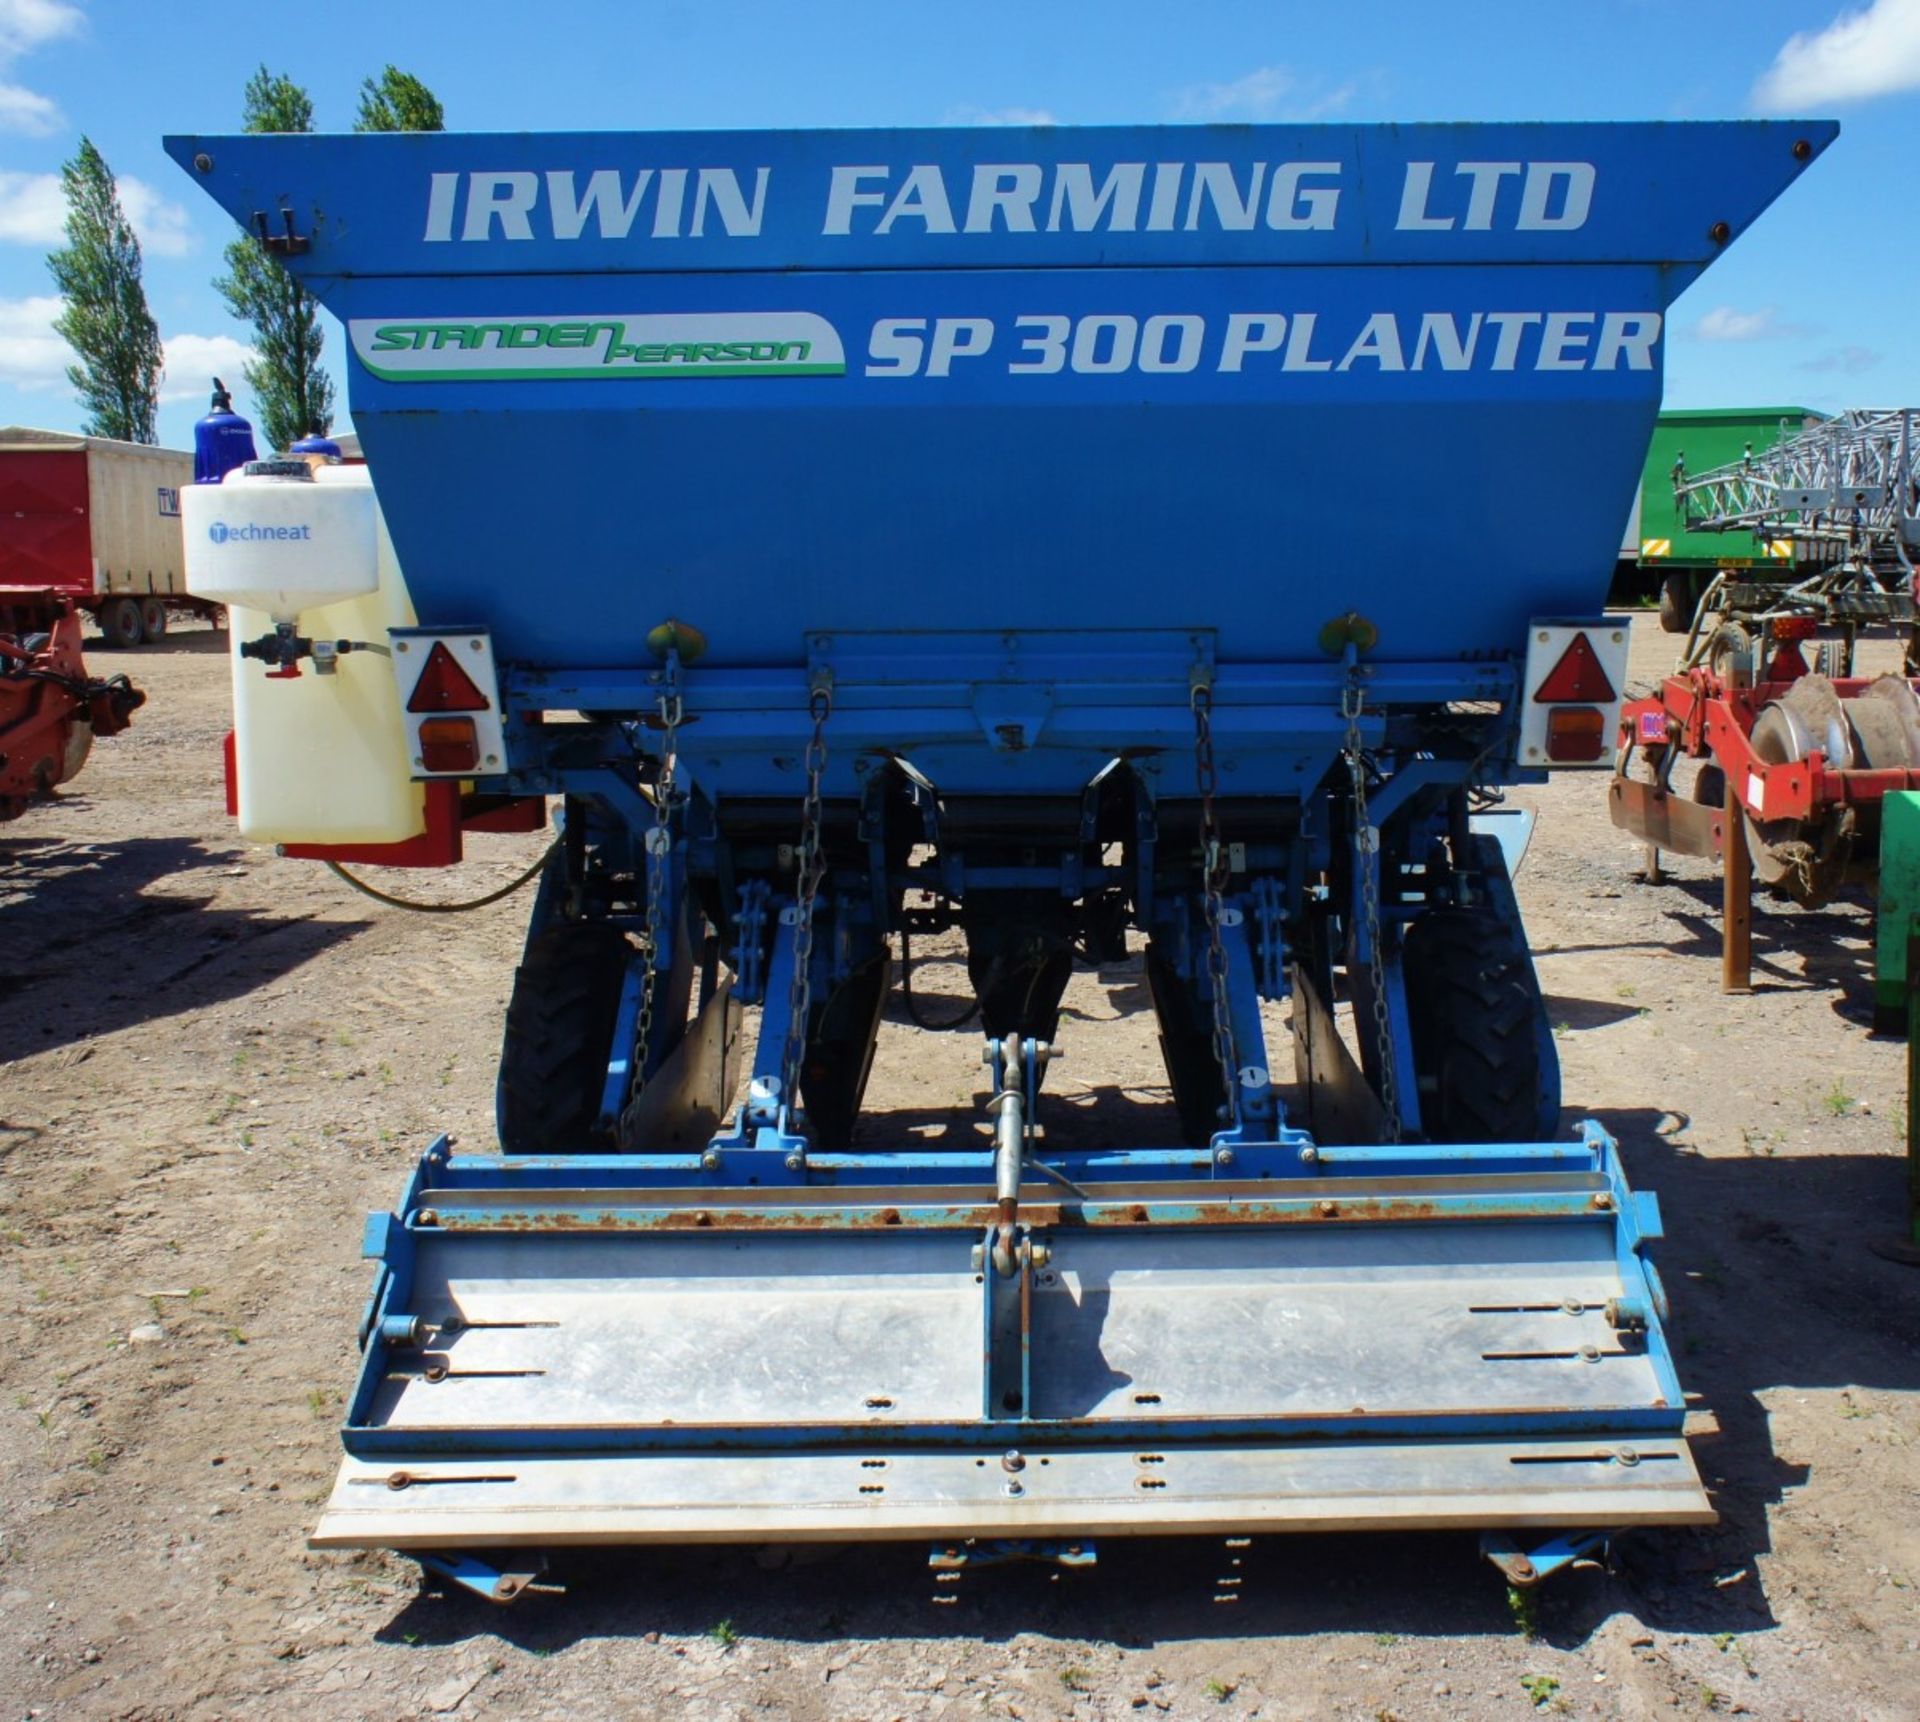 Standen Pearson BB3 (SP300), 3 Row Potato Planter, Serial Number 678, Year 2012 - Image 8 of 8